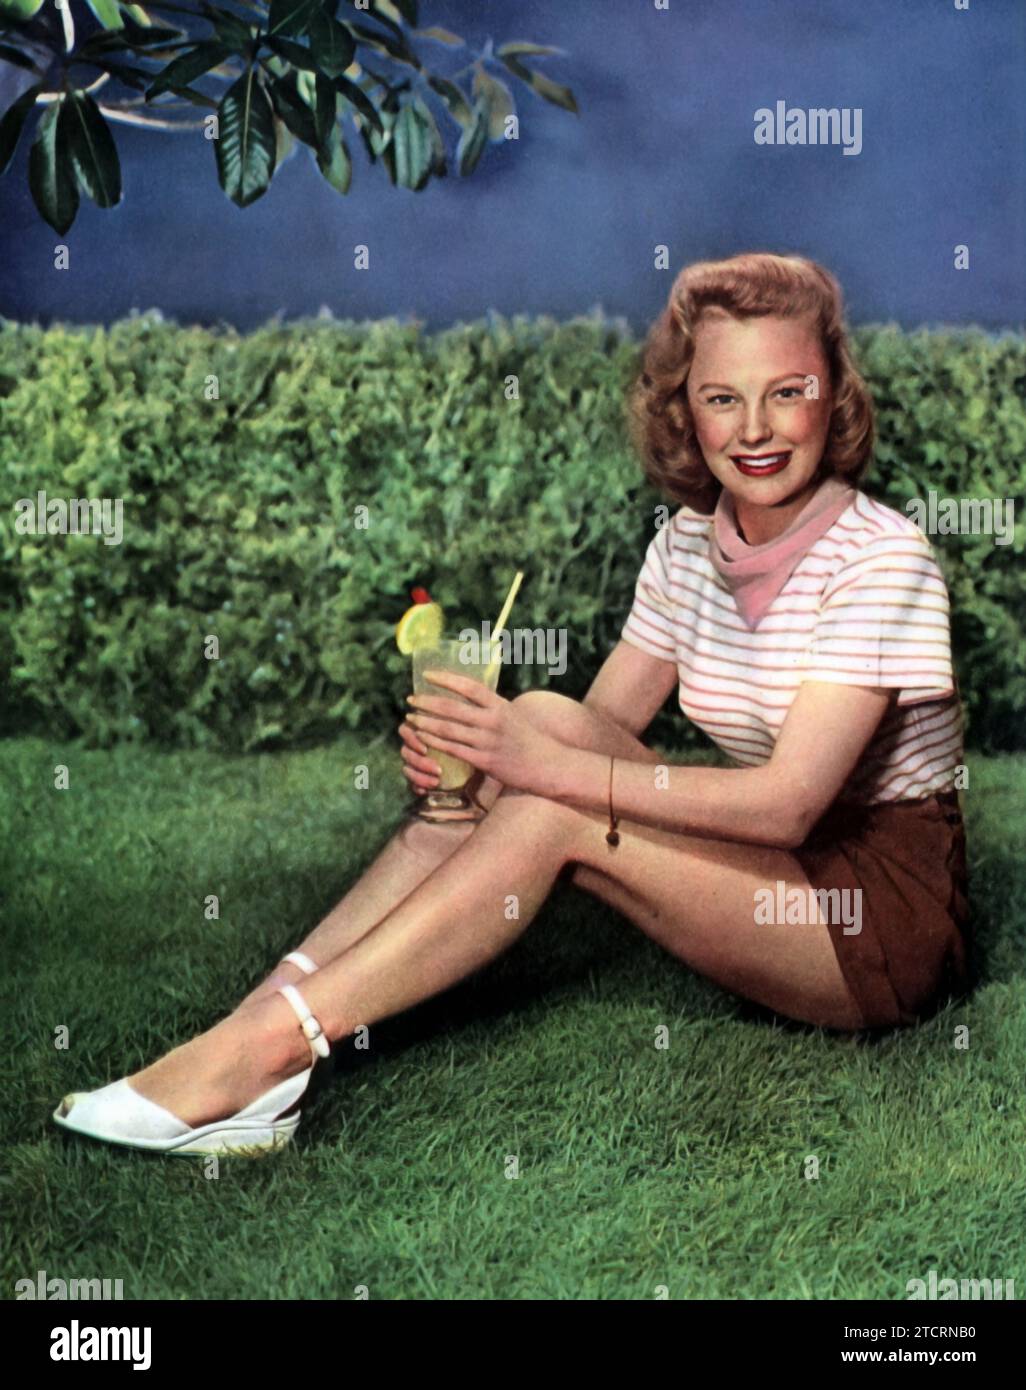 June Allyson, born on October 7, 1917, was a prominent figure in 1946's Hollywood. Known for her girl-next-door persona, she starred in the film 'Two Sisters from Boston' that year. The movie showcased her acting and singing skills, further cementing her status in the film industry. Allyson's career spanned several decades, leaving a lasting impact on cinema. She passed away on July 8, 2006. Stock Photo